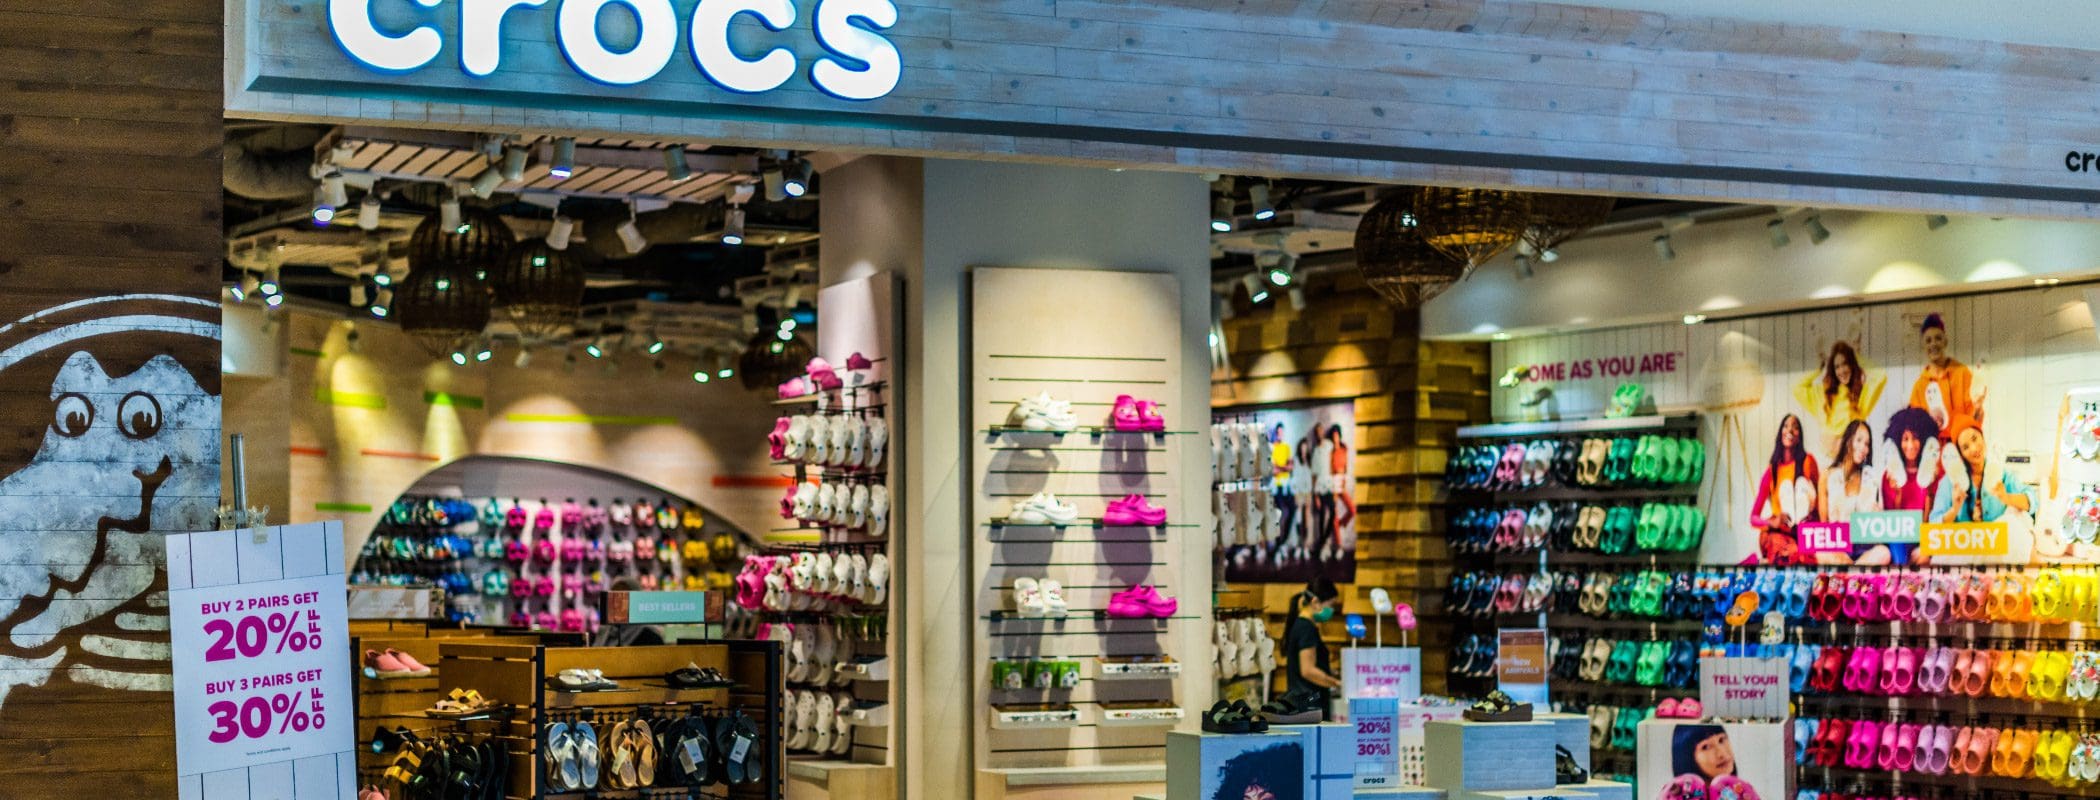 Crocs reaches greater heights across the globe through the integration of several disparate systems